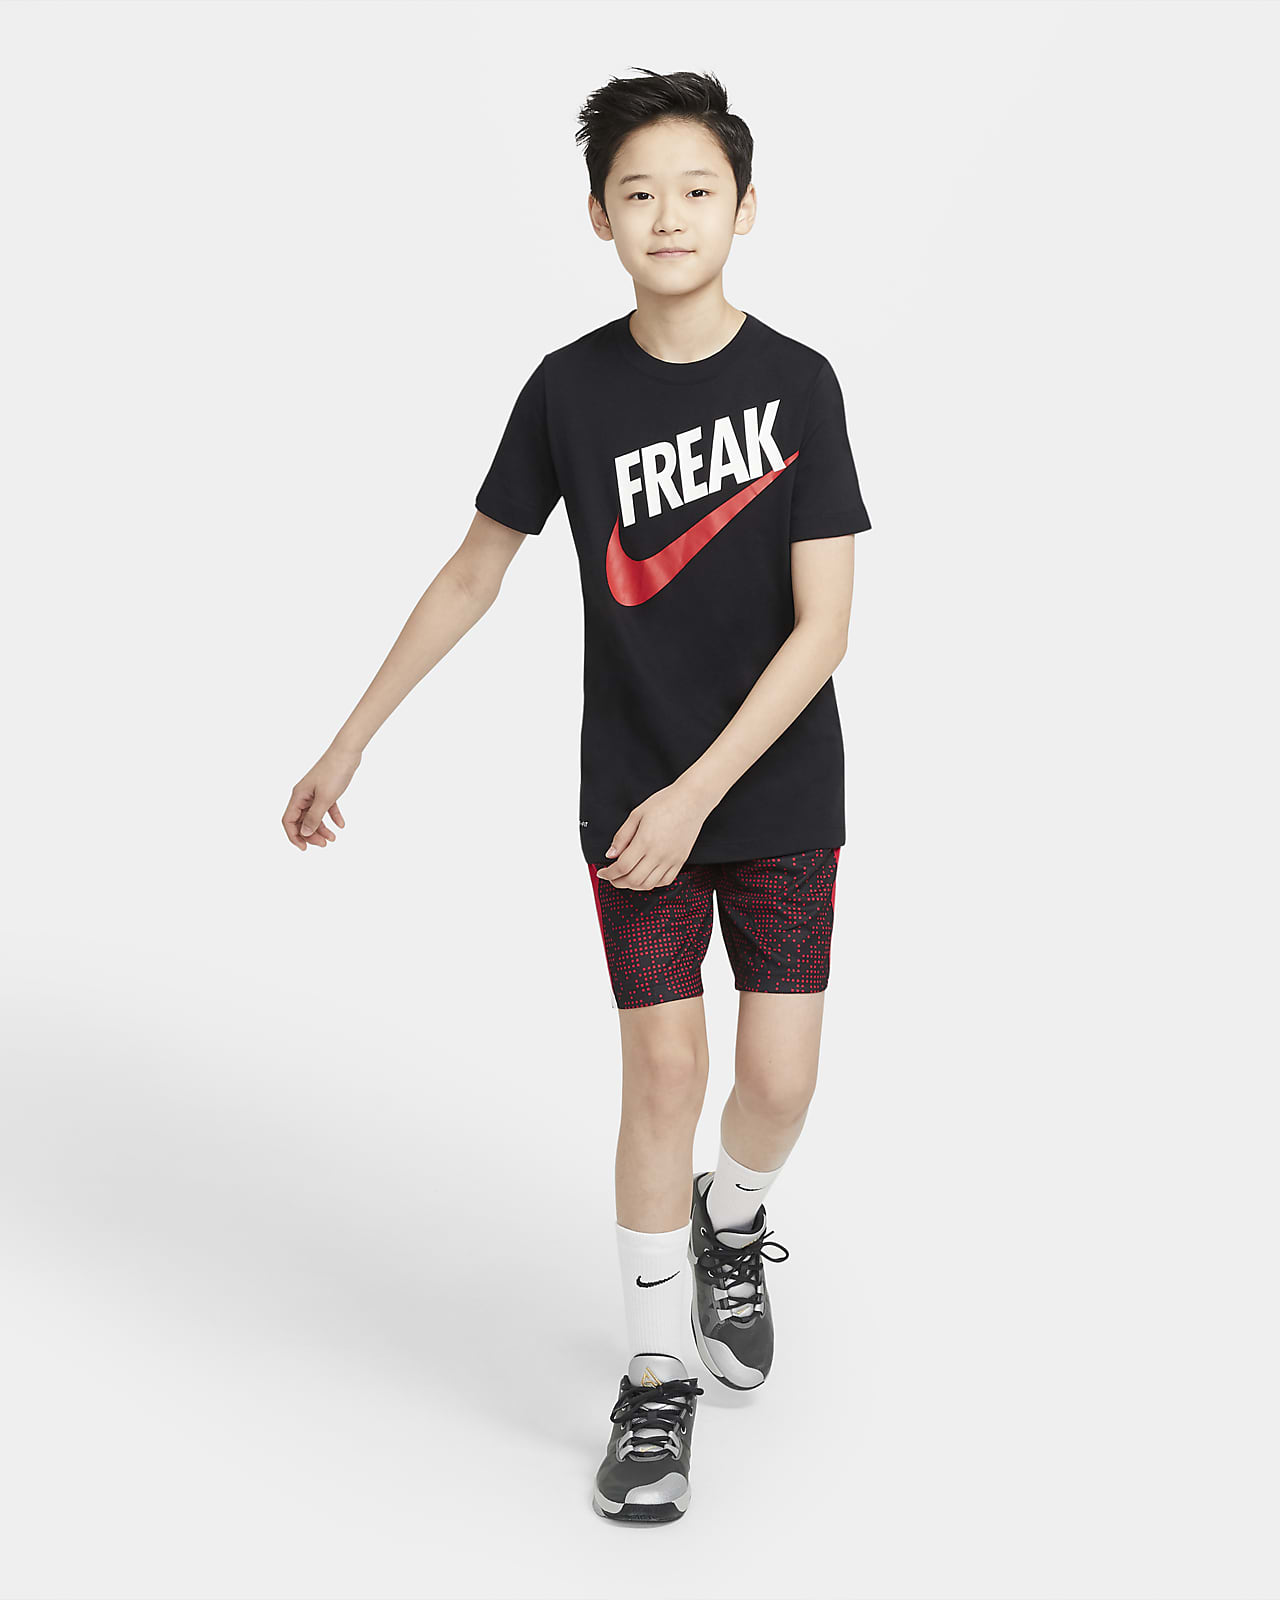 Buy > youth nike dri fit shirts > in stock